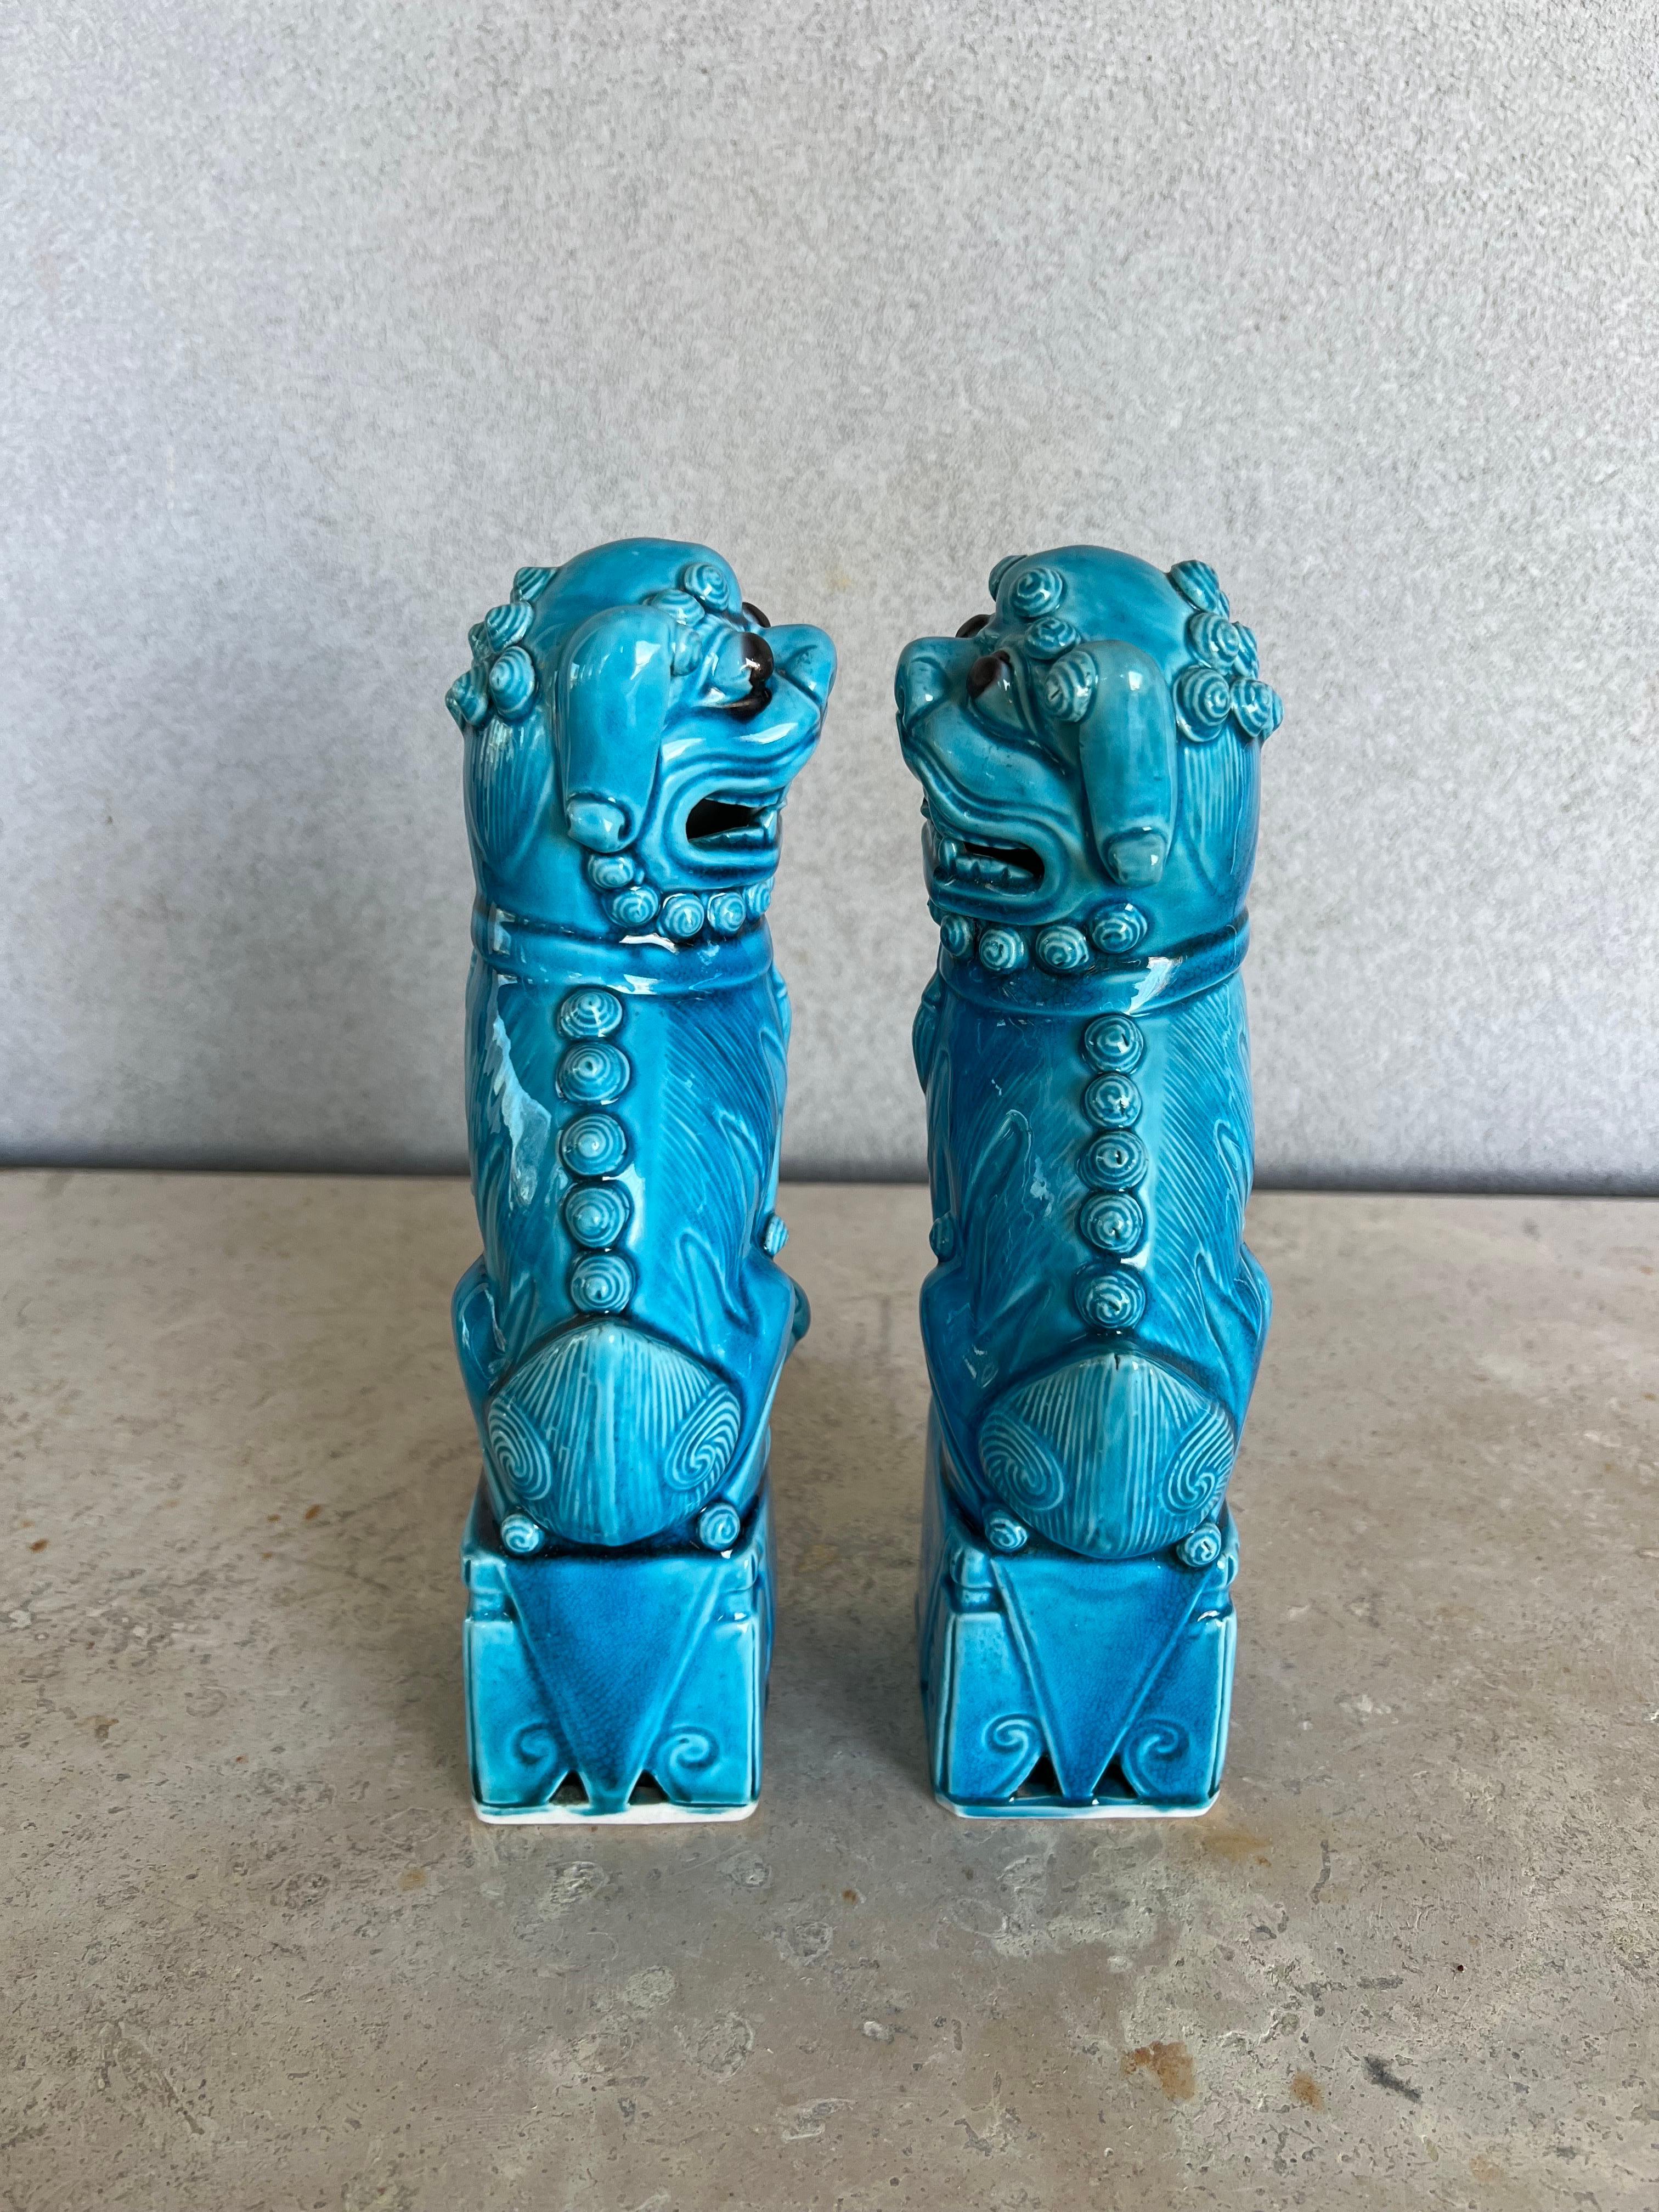 Stunning pair of left and right facing Chinese Foo Dog statues in turquoise glaze, ancient symbols of prosperity, longevity and protection will bring beauty and balance to any decorative arrangement
In perfect condition 
1.75” W x 2.25” L x 9.5” H